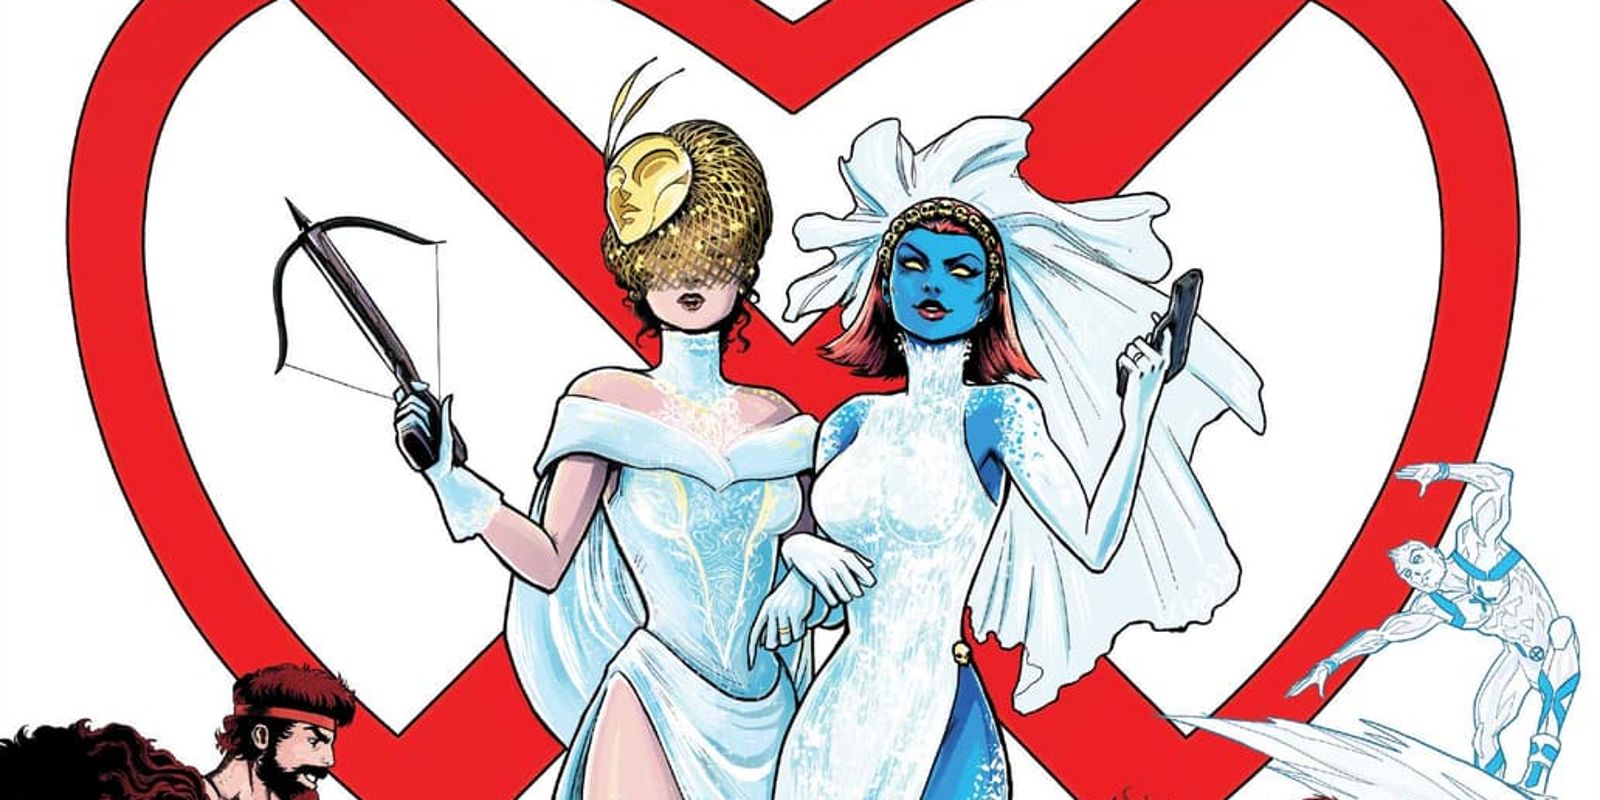 Mystique and Destiny are wearing wedding dresses, with their arms linked, each holding a weapon. 